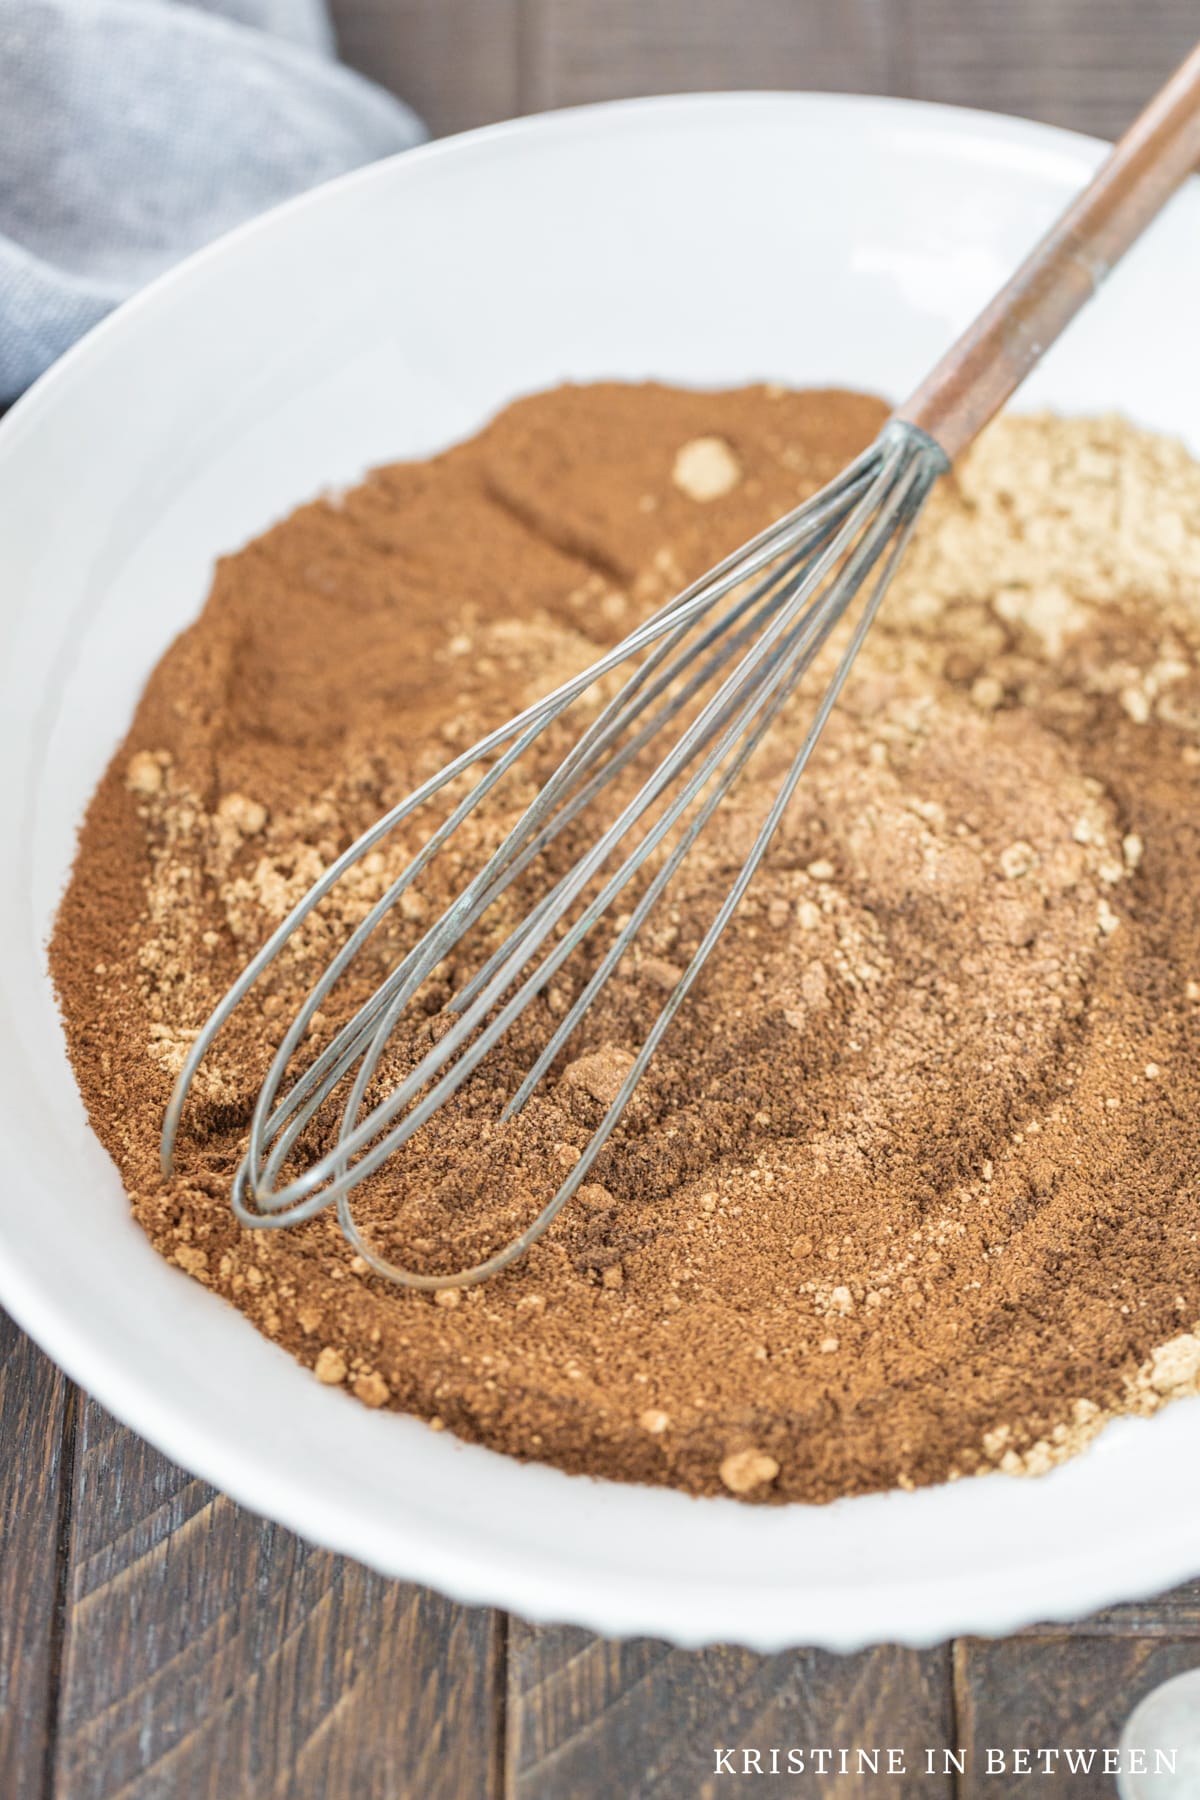 Spices whisked together on a white plate with an old whisk.